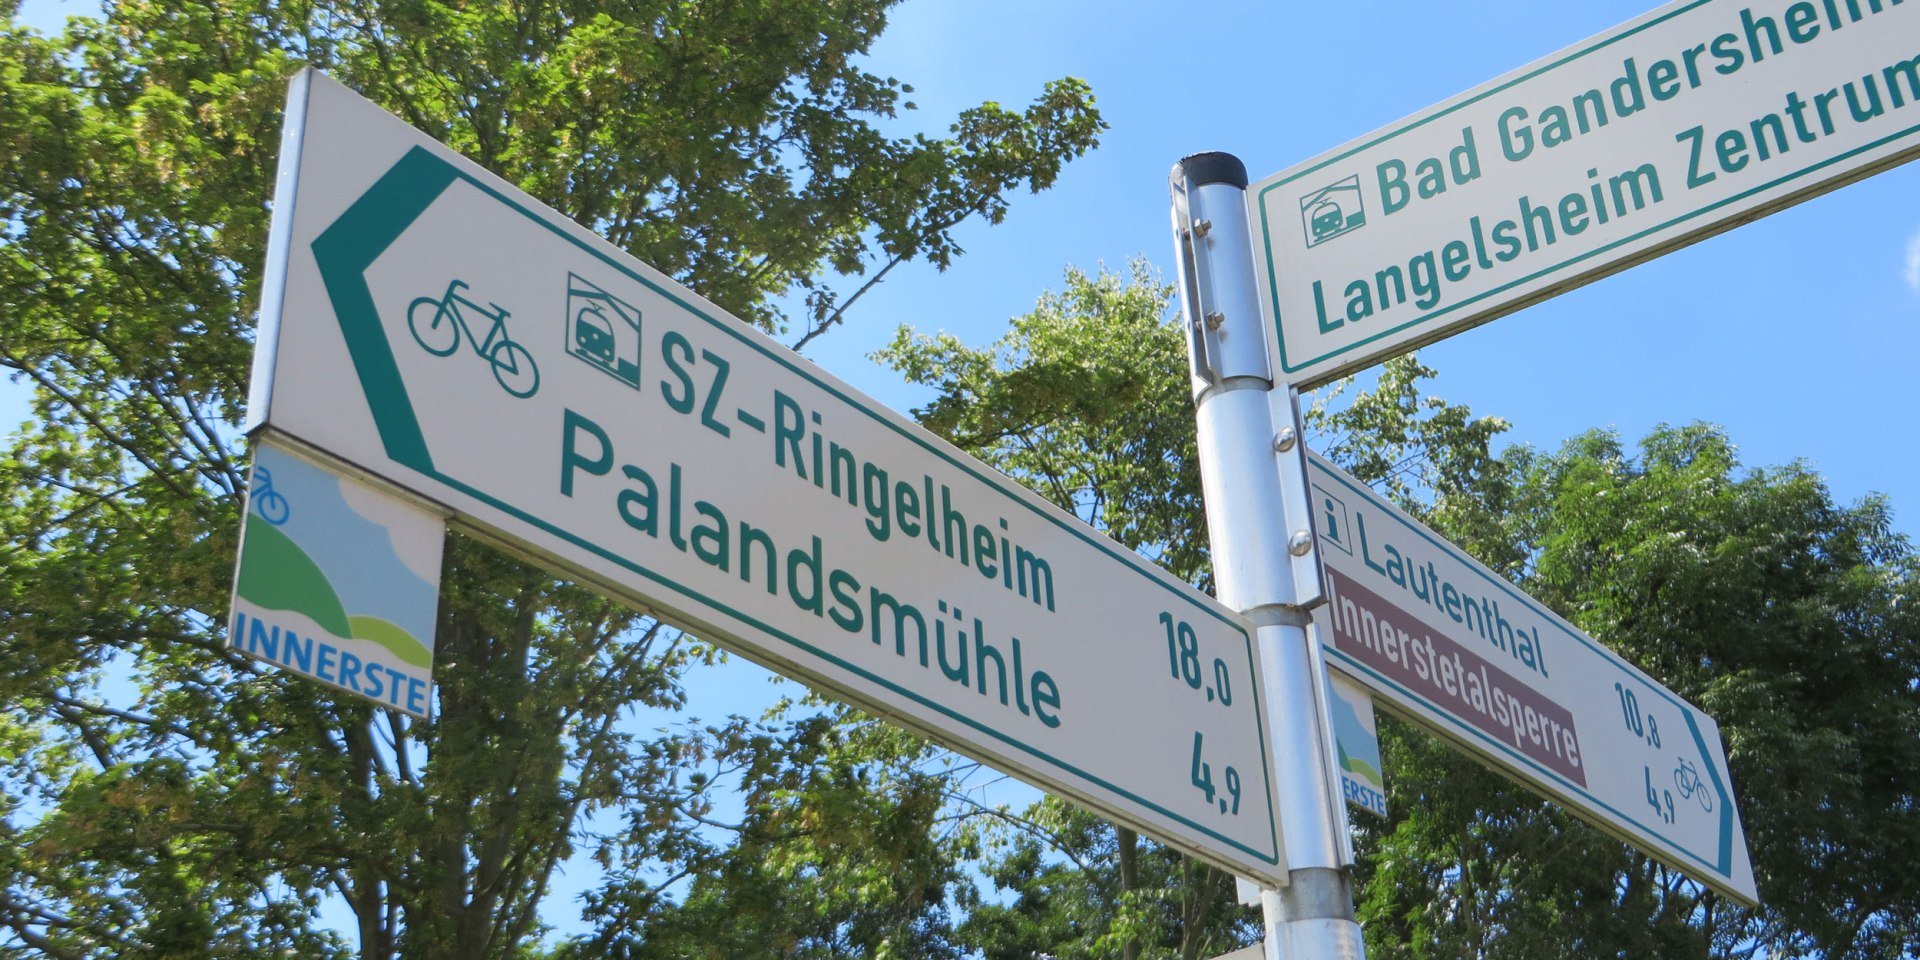 Bike signpost on the Innerste Cycle Path, © Tourismusverband Nördliches Harzvorland / e.V.